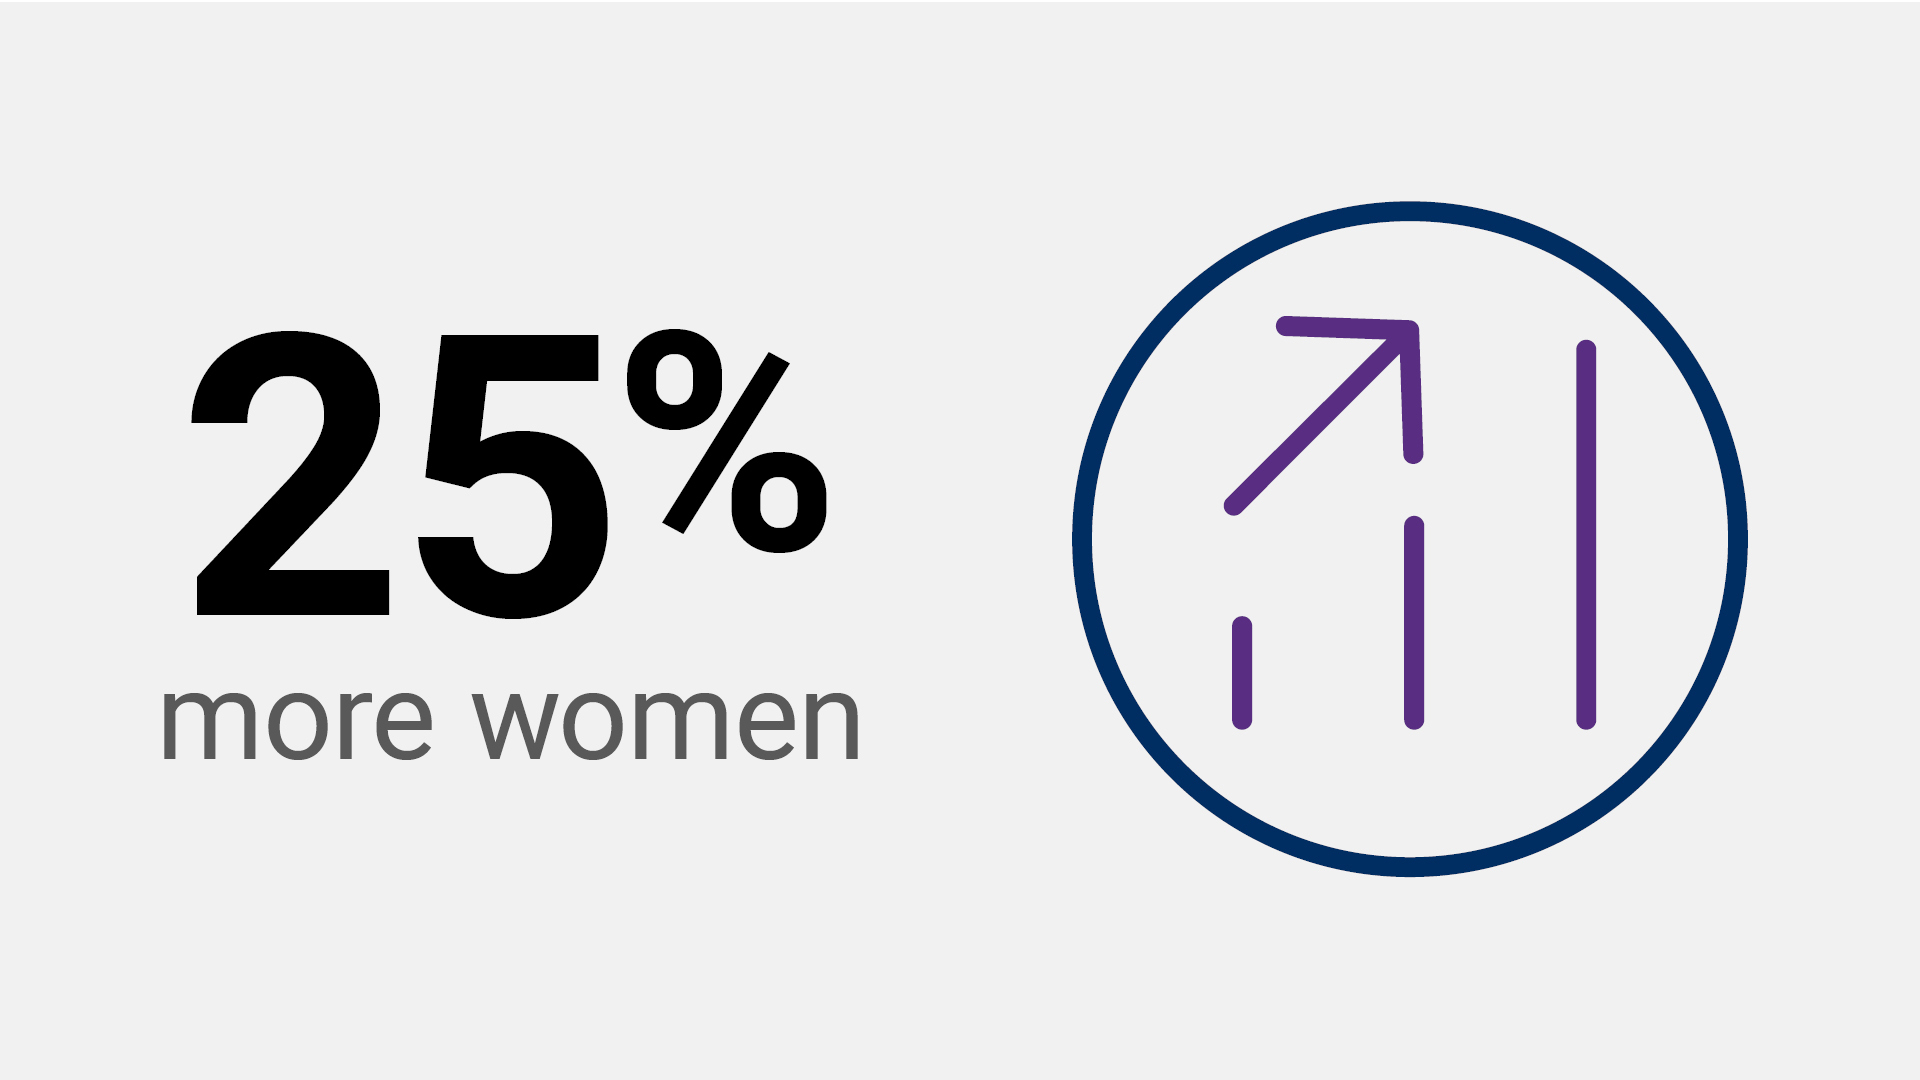 25% more women at the senior manager, director, and partner levels